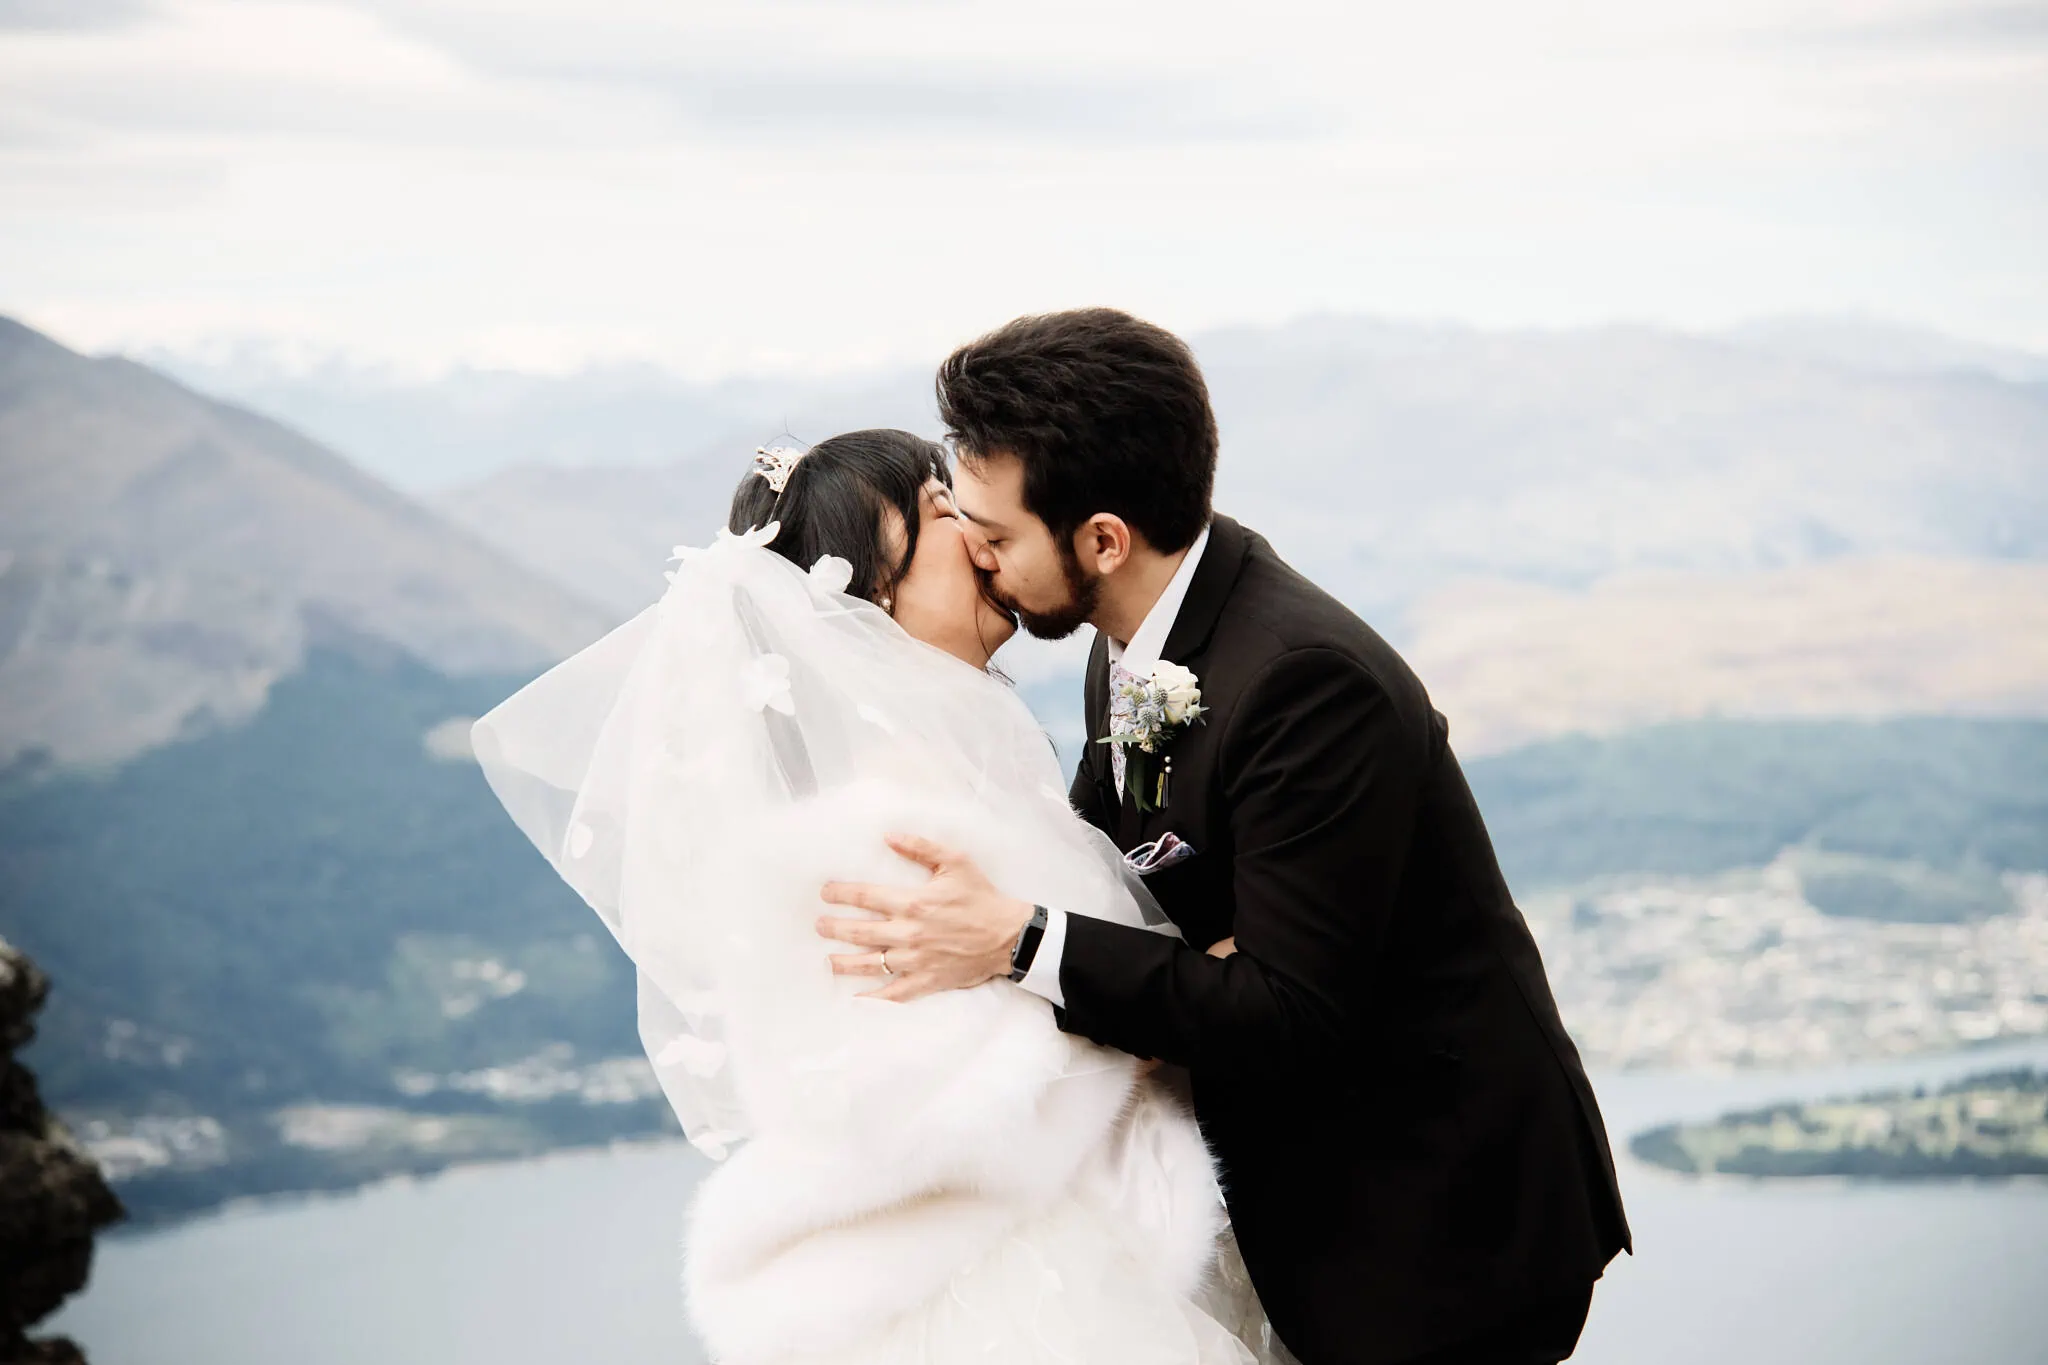 Carlos and Wanzhu have an intimate heli elopement wedding on top of Cecil Peak, overlooking Lake Wanaka.